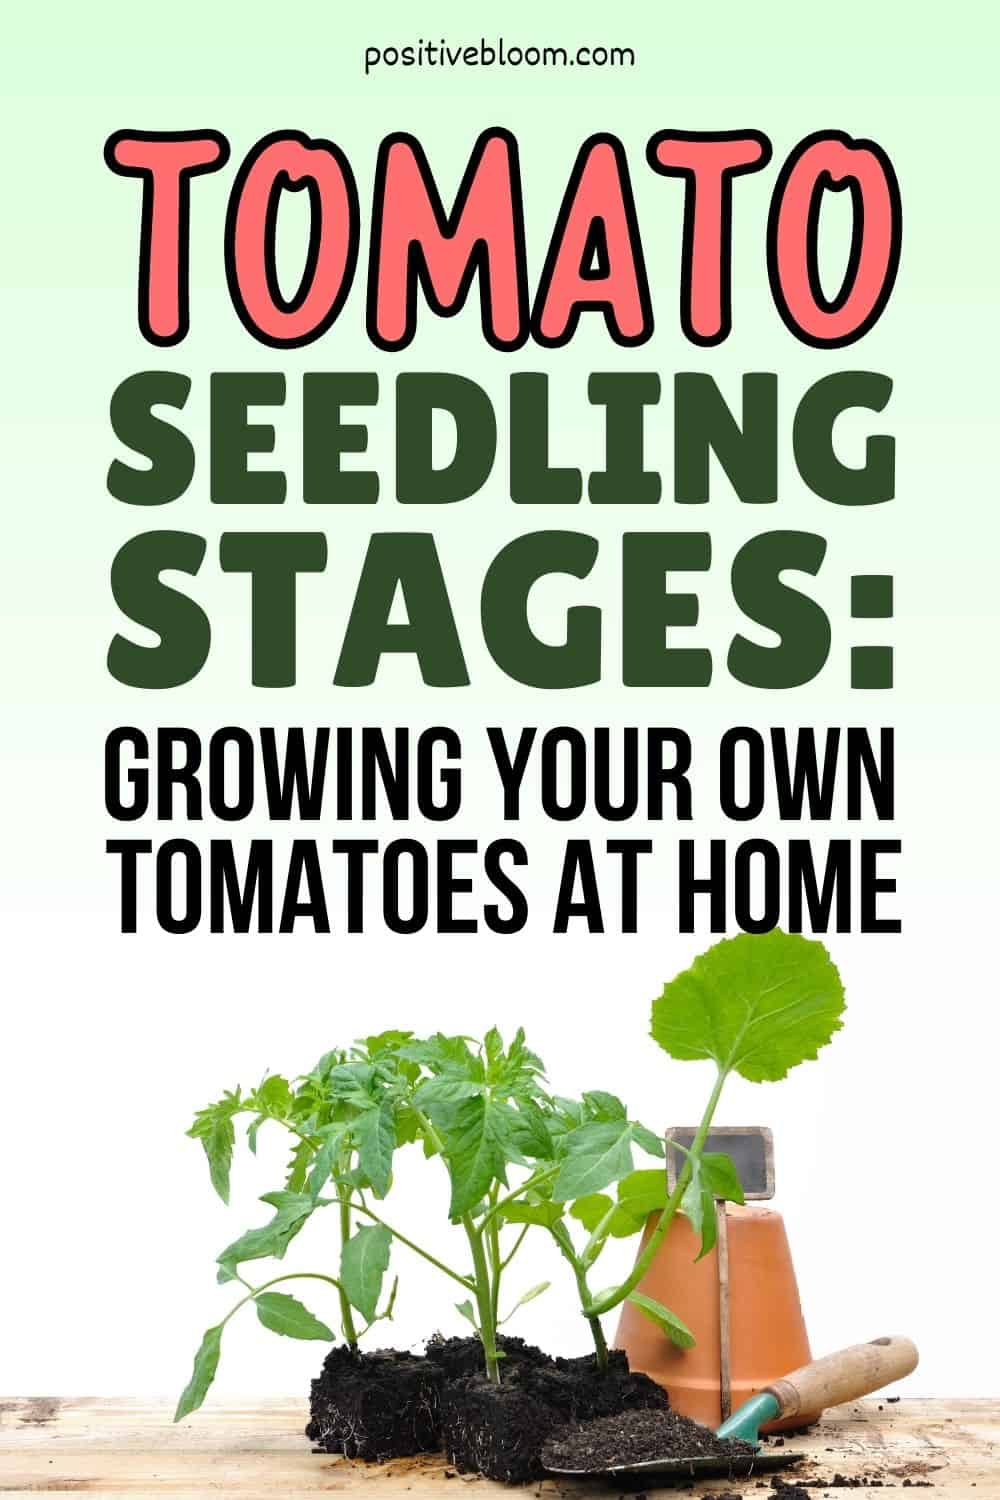 Tomato Seedling Stages Growing Your Own Tomatoes At Home Pinterest